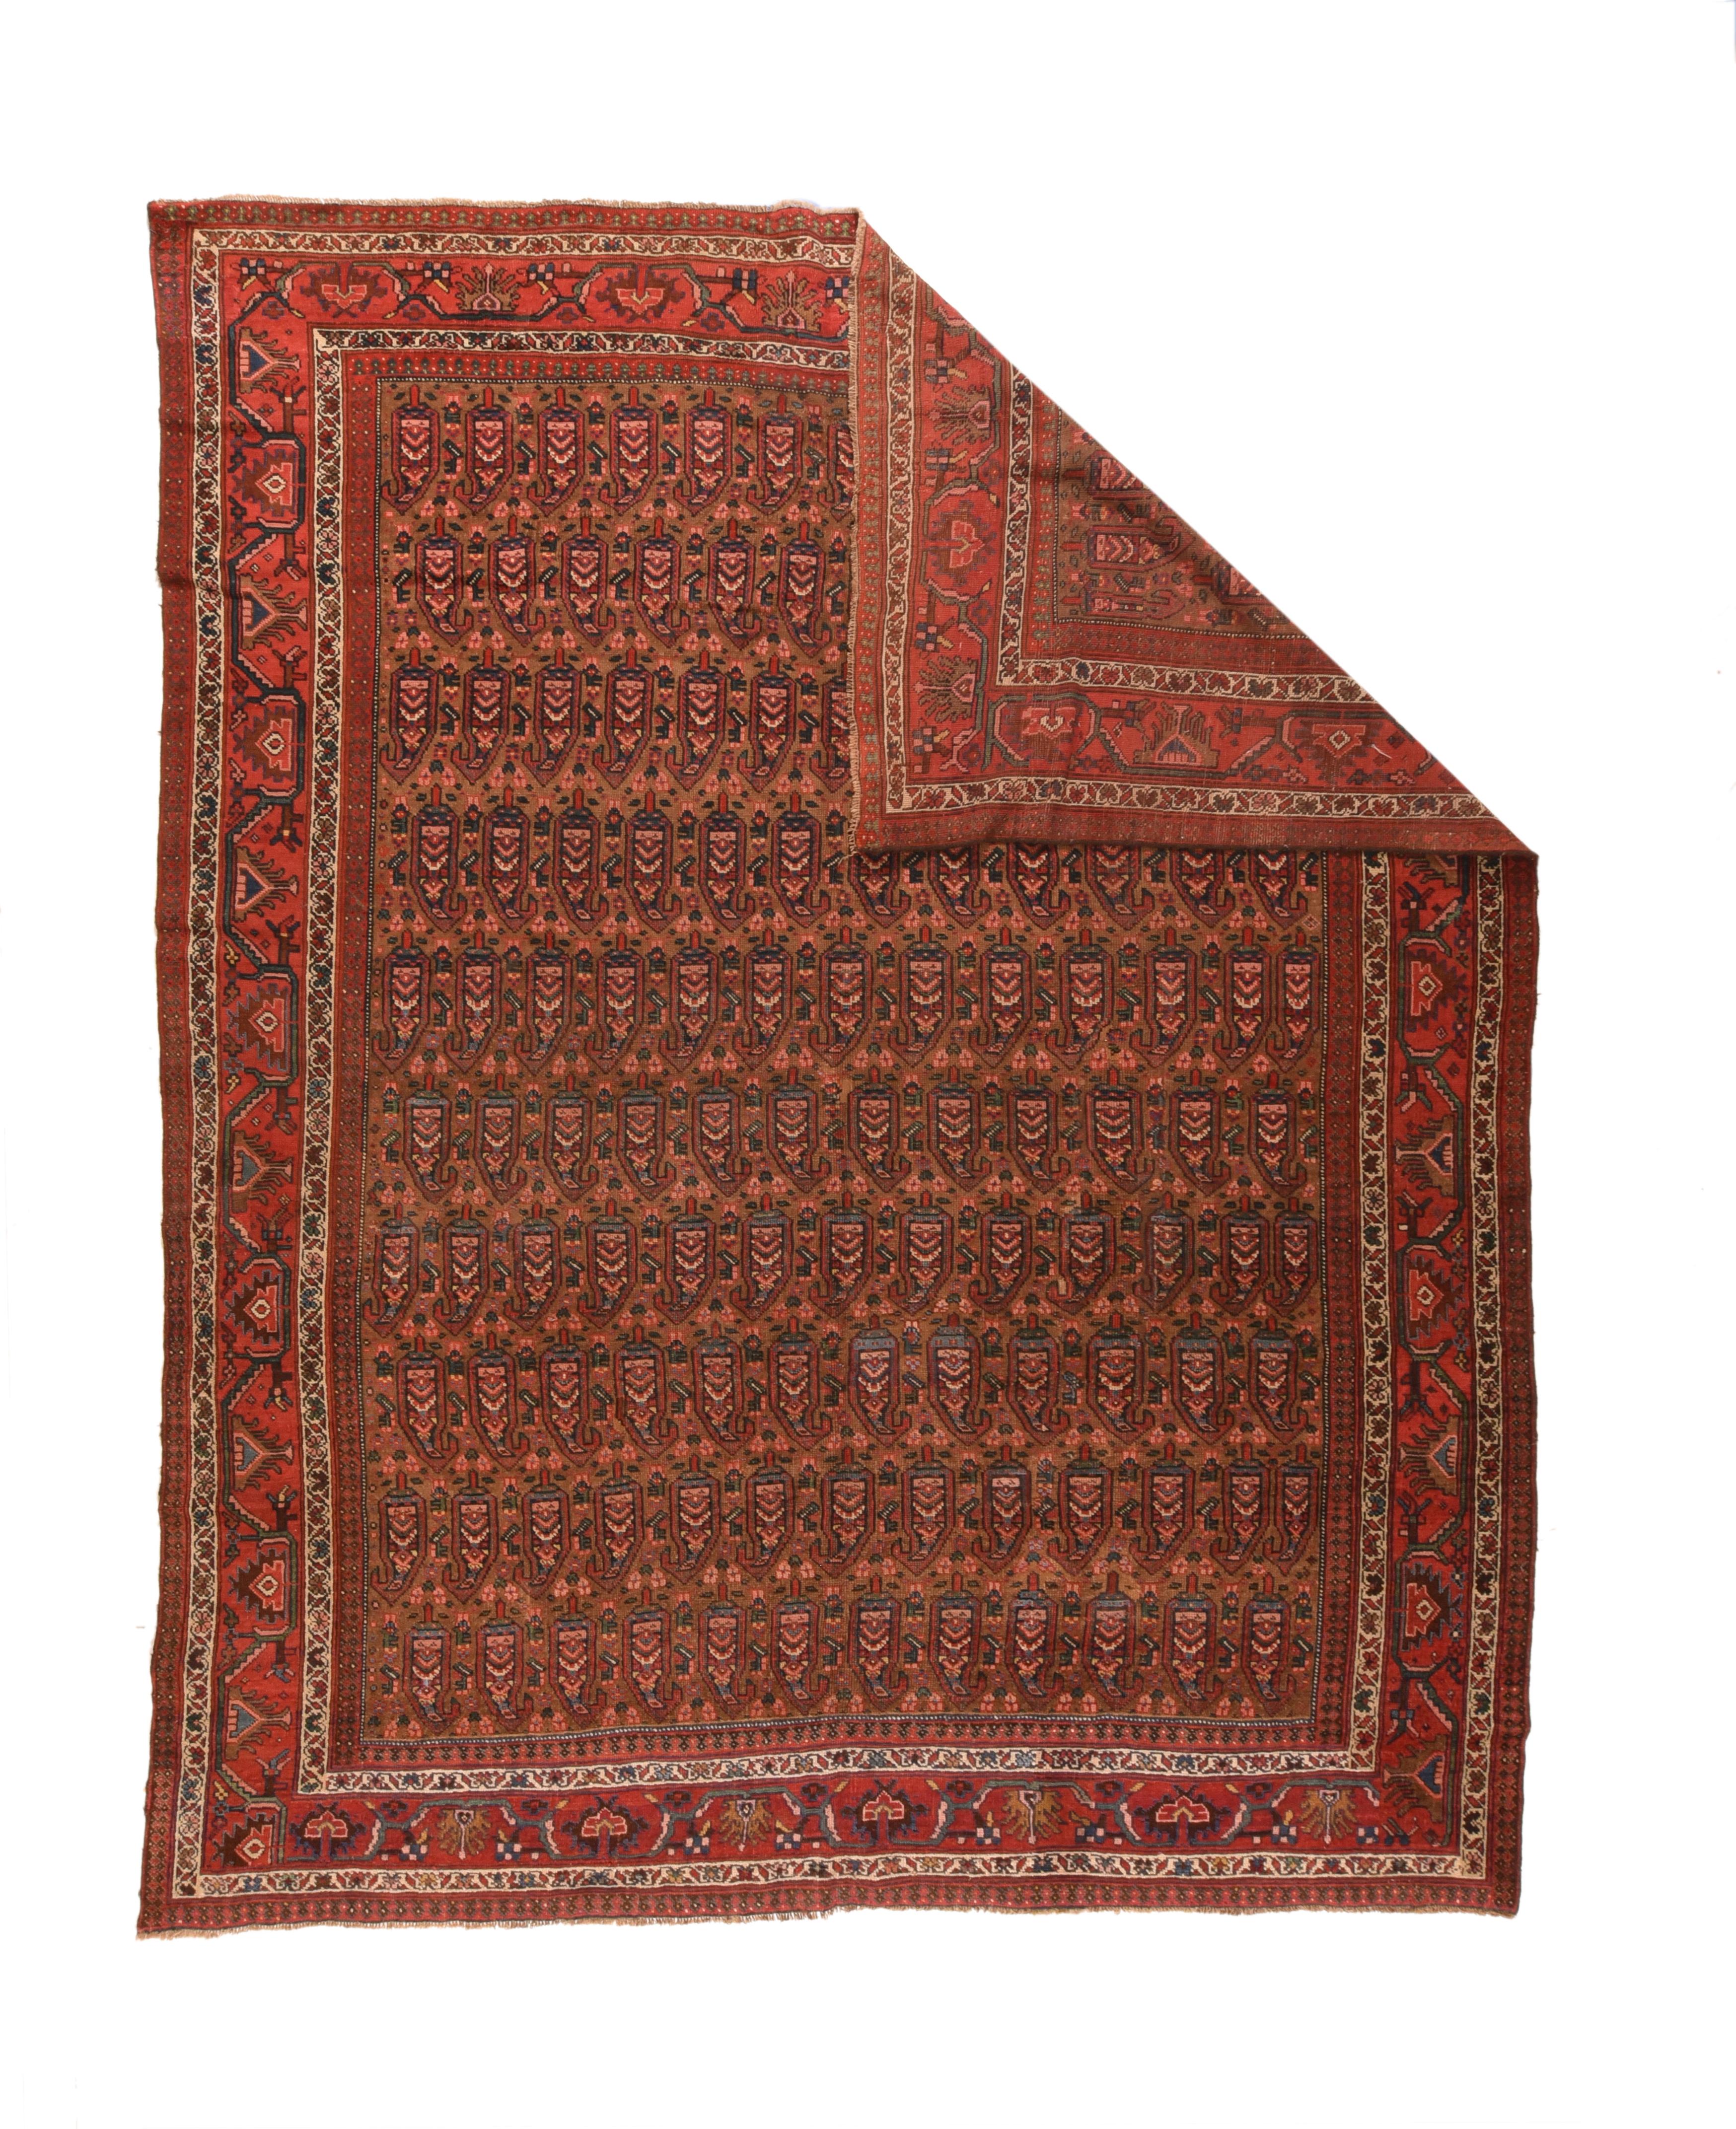 Antique Bidjar Rug 7'11'' x 10'6''. The coral tan field shows yen reversing, offset rows of geometric botehs. Red main strip style border with reversing triangular, fringed palmettes in the Malayer manner. En suite, ecru minors with reversing fan